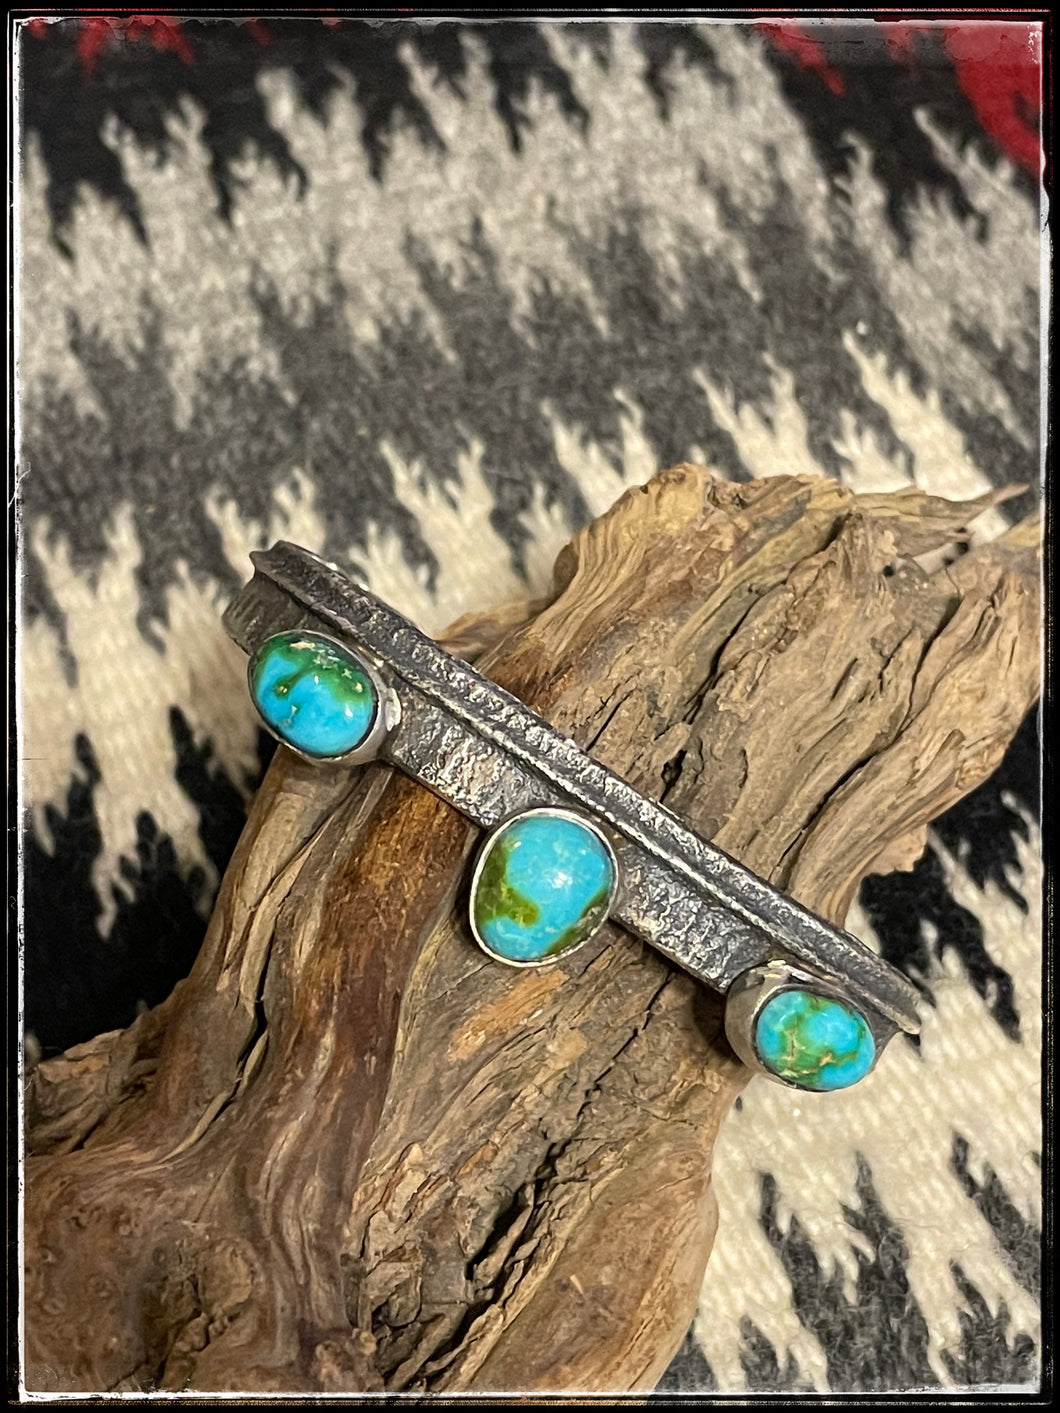 WD tufa cast and sonoran gold turquoise stacker cuff